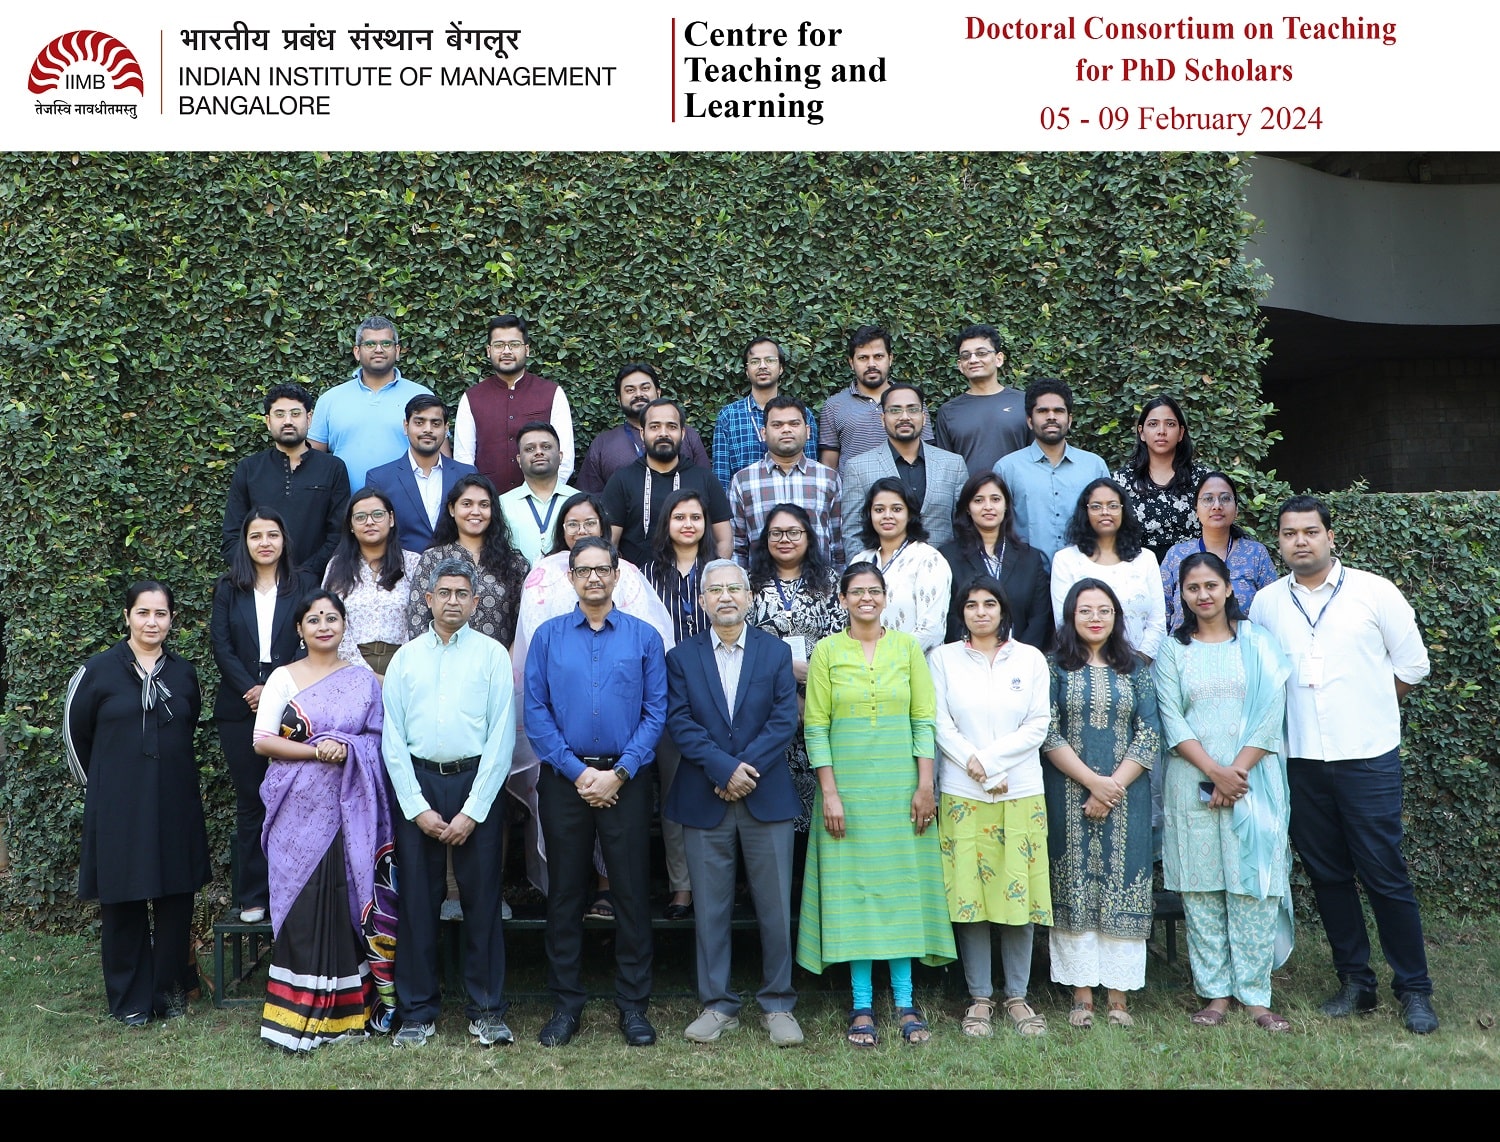 At the centre, Prof. Rahul De', Dean (Programmes), IIM Bangalore.   To his left, Prof. Sushanta Mishra, Chairperson, Centre for Teaching, Prof. Ananth Krishnamurthy, Chairperson of the Doctoral Programme at IIMB, and Lopamudra Dewan, Manager of CTL. 